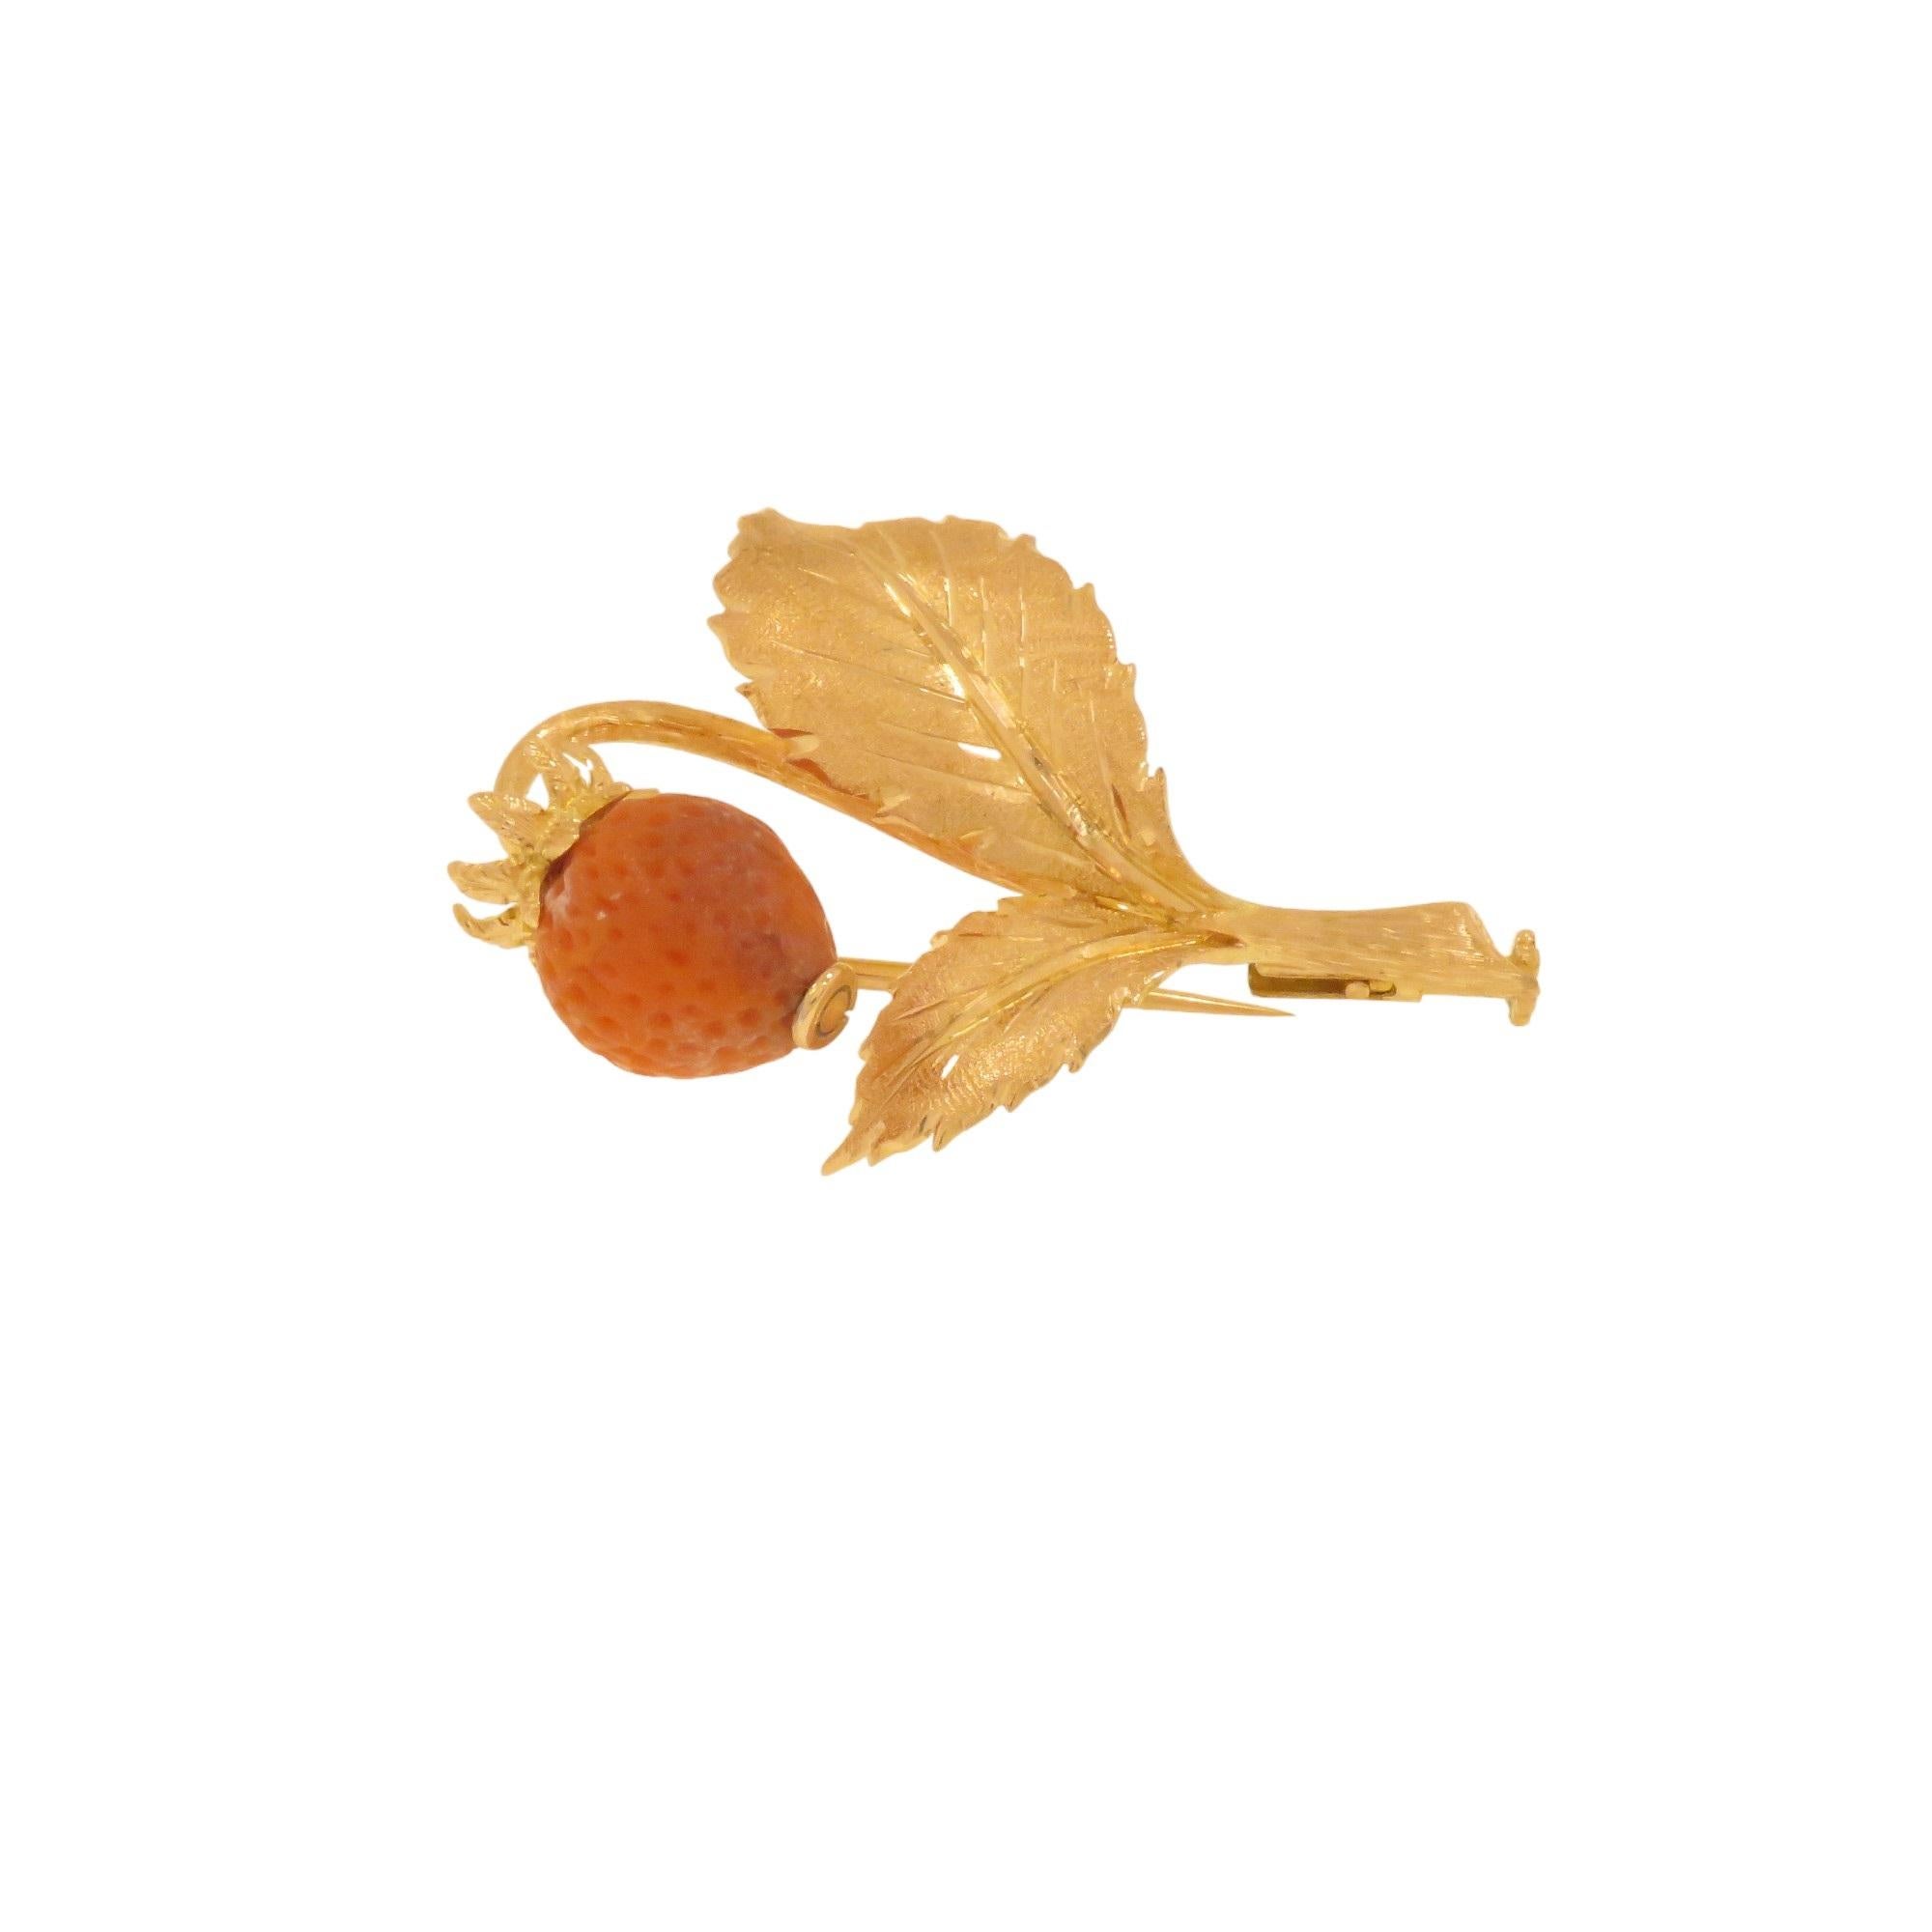 Gorgeous brooch depicting a strawberry made of coral with leaves in 18K yellow gold. Handcrafted finely carved and engraved by the hands of a skilled goldsmith. Produced between 1960 and 1970. The brooch  has the 18k gold mark, measures 36x24